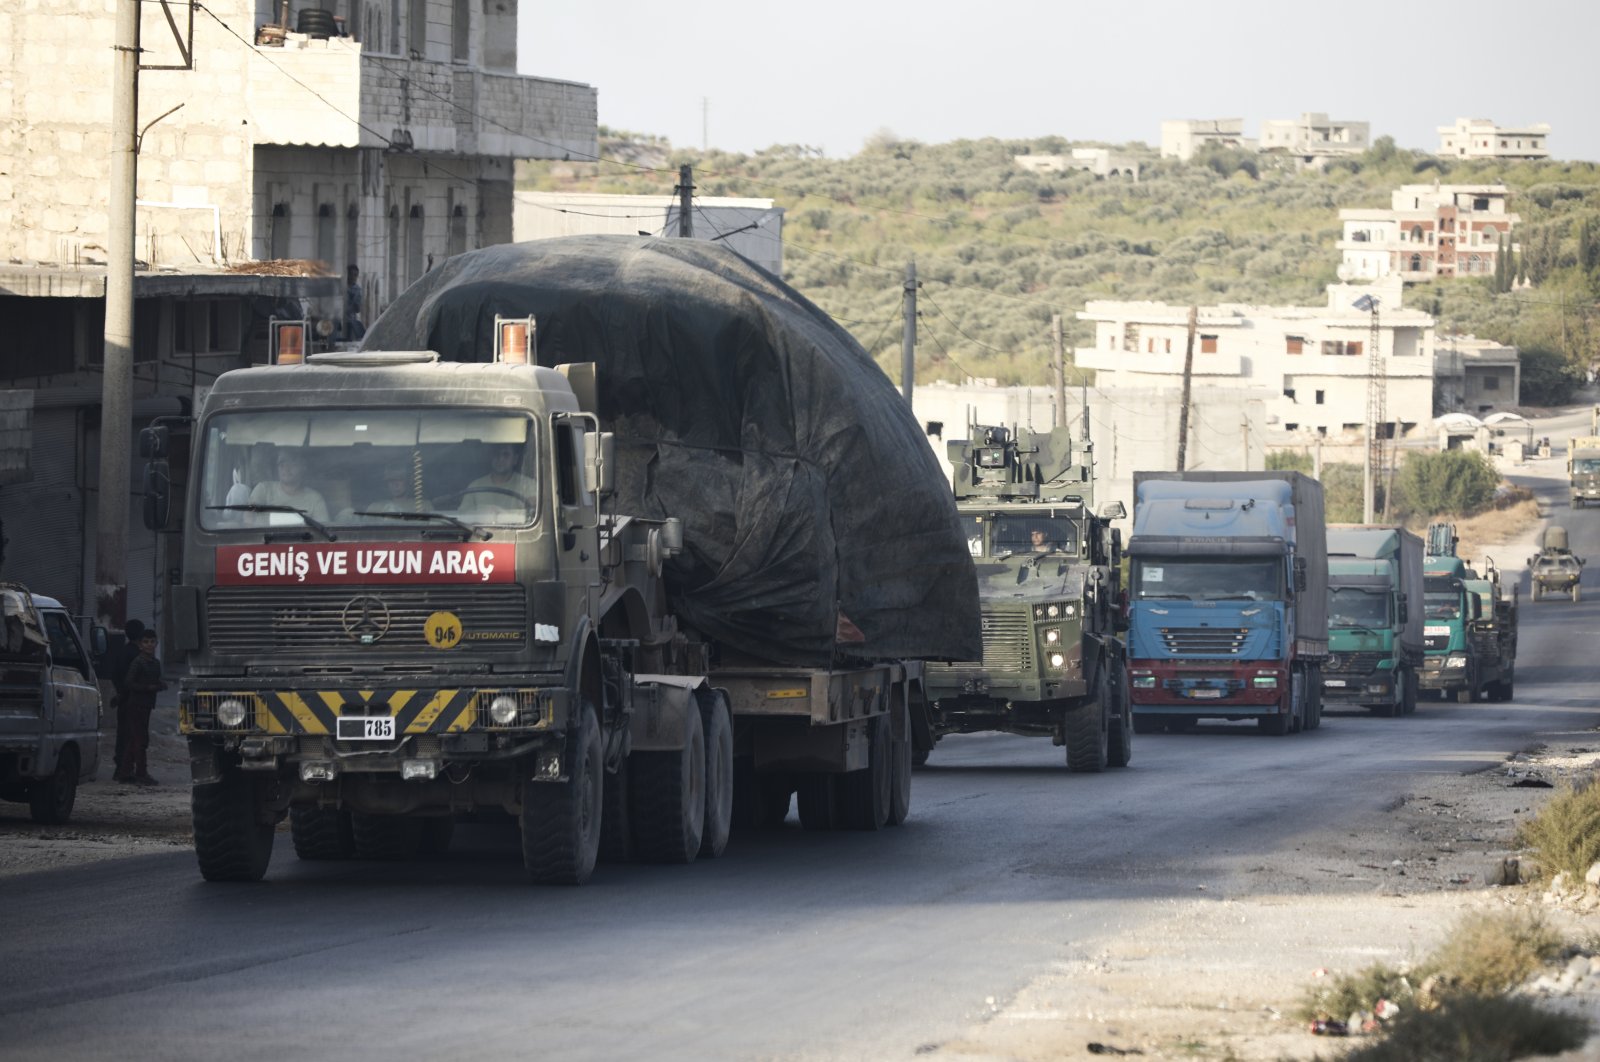 A Turkish military convoy drives through the village of Urum al-Jawz, in Idlib province, Syria, Oct. 20, 2020. (AP File Photo)